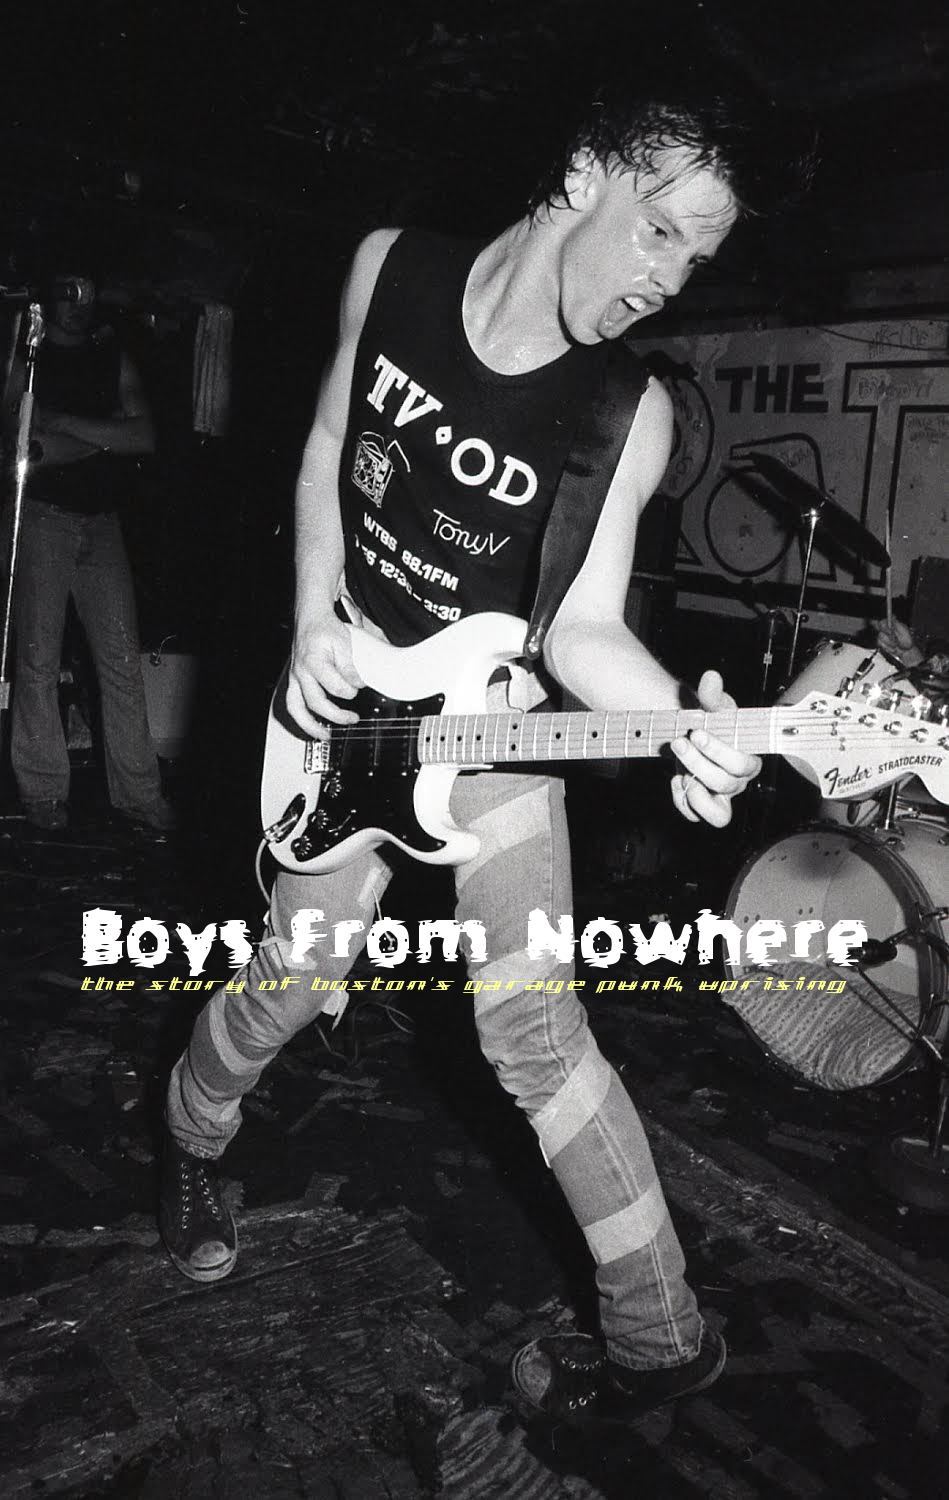 Boys from Nowhere: The Story of Boston's Garage Punk Uprising